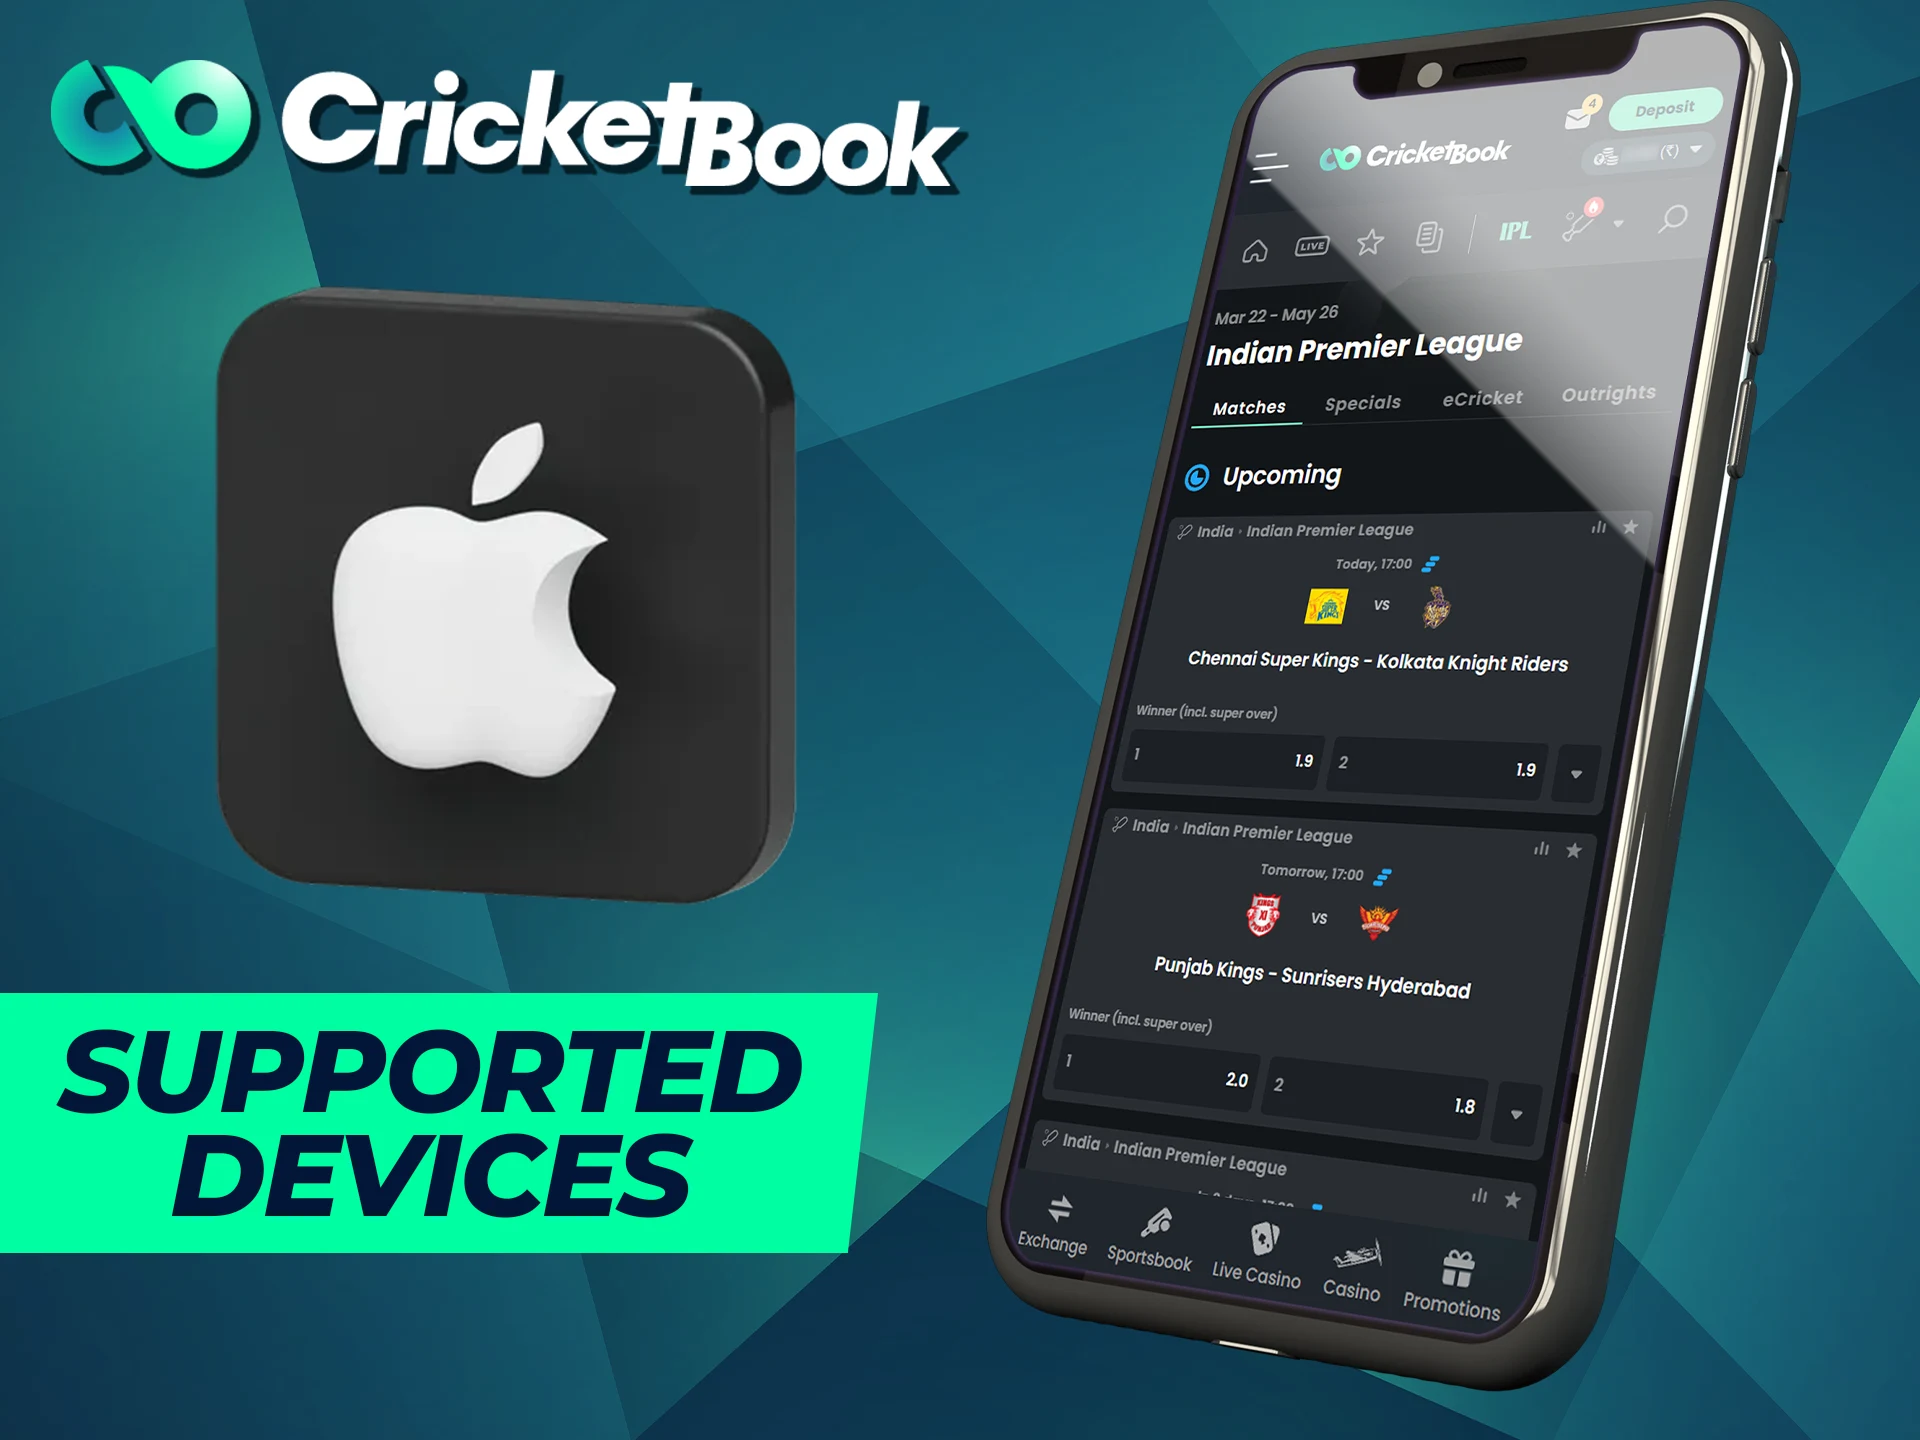 All iOS devices are compatible with CricketBook.